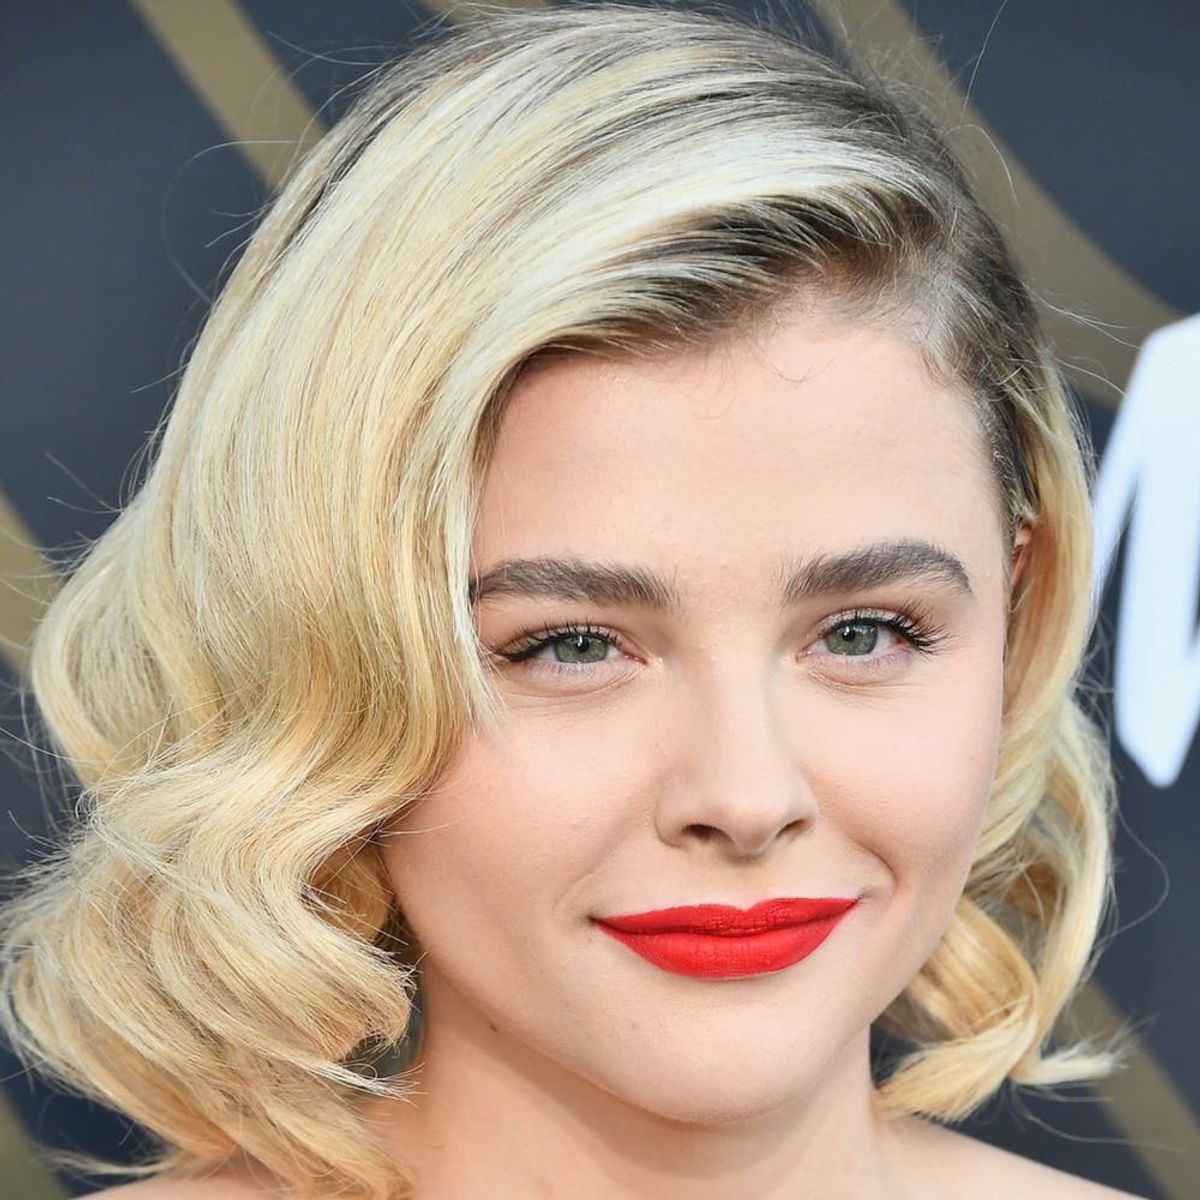 Chloë Grace Moretz Posted the Most Heartbreaking Tribute to Her Late Dog Isabella